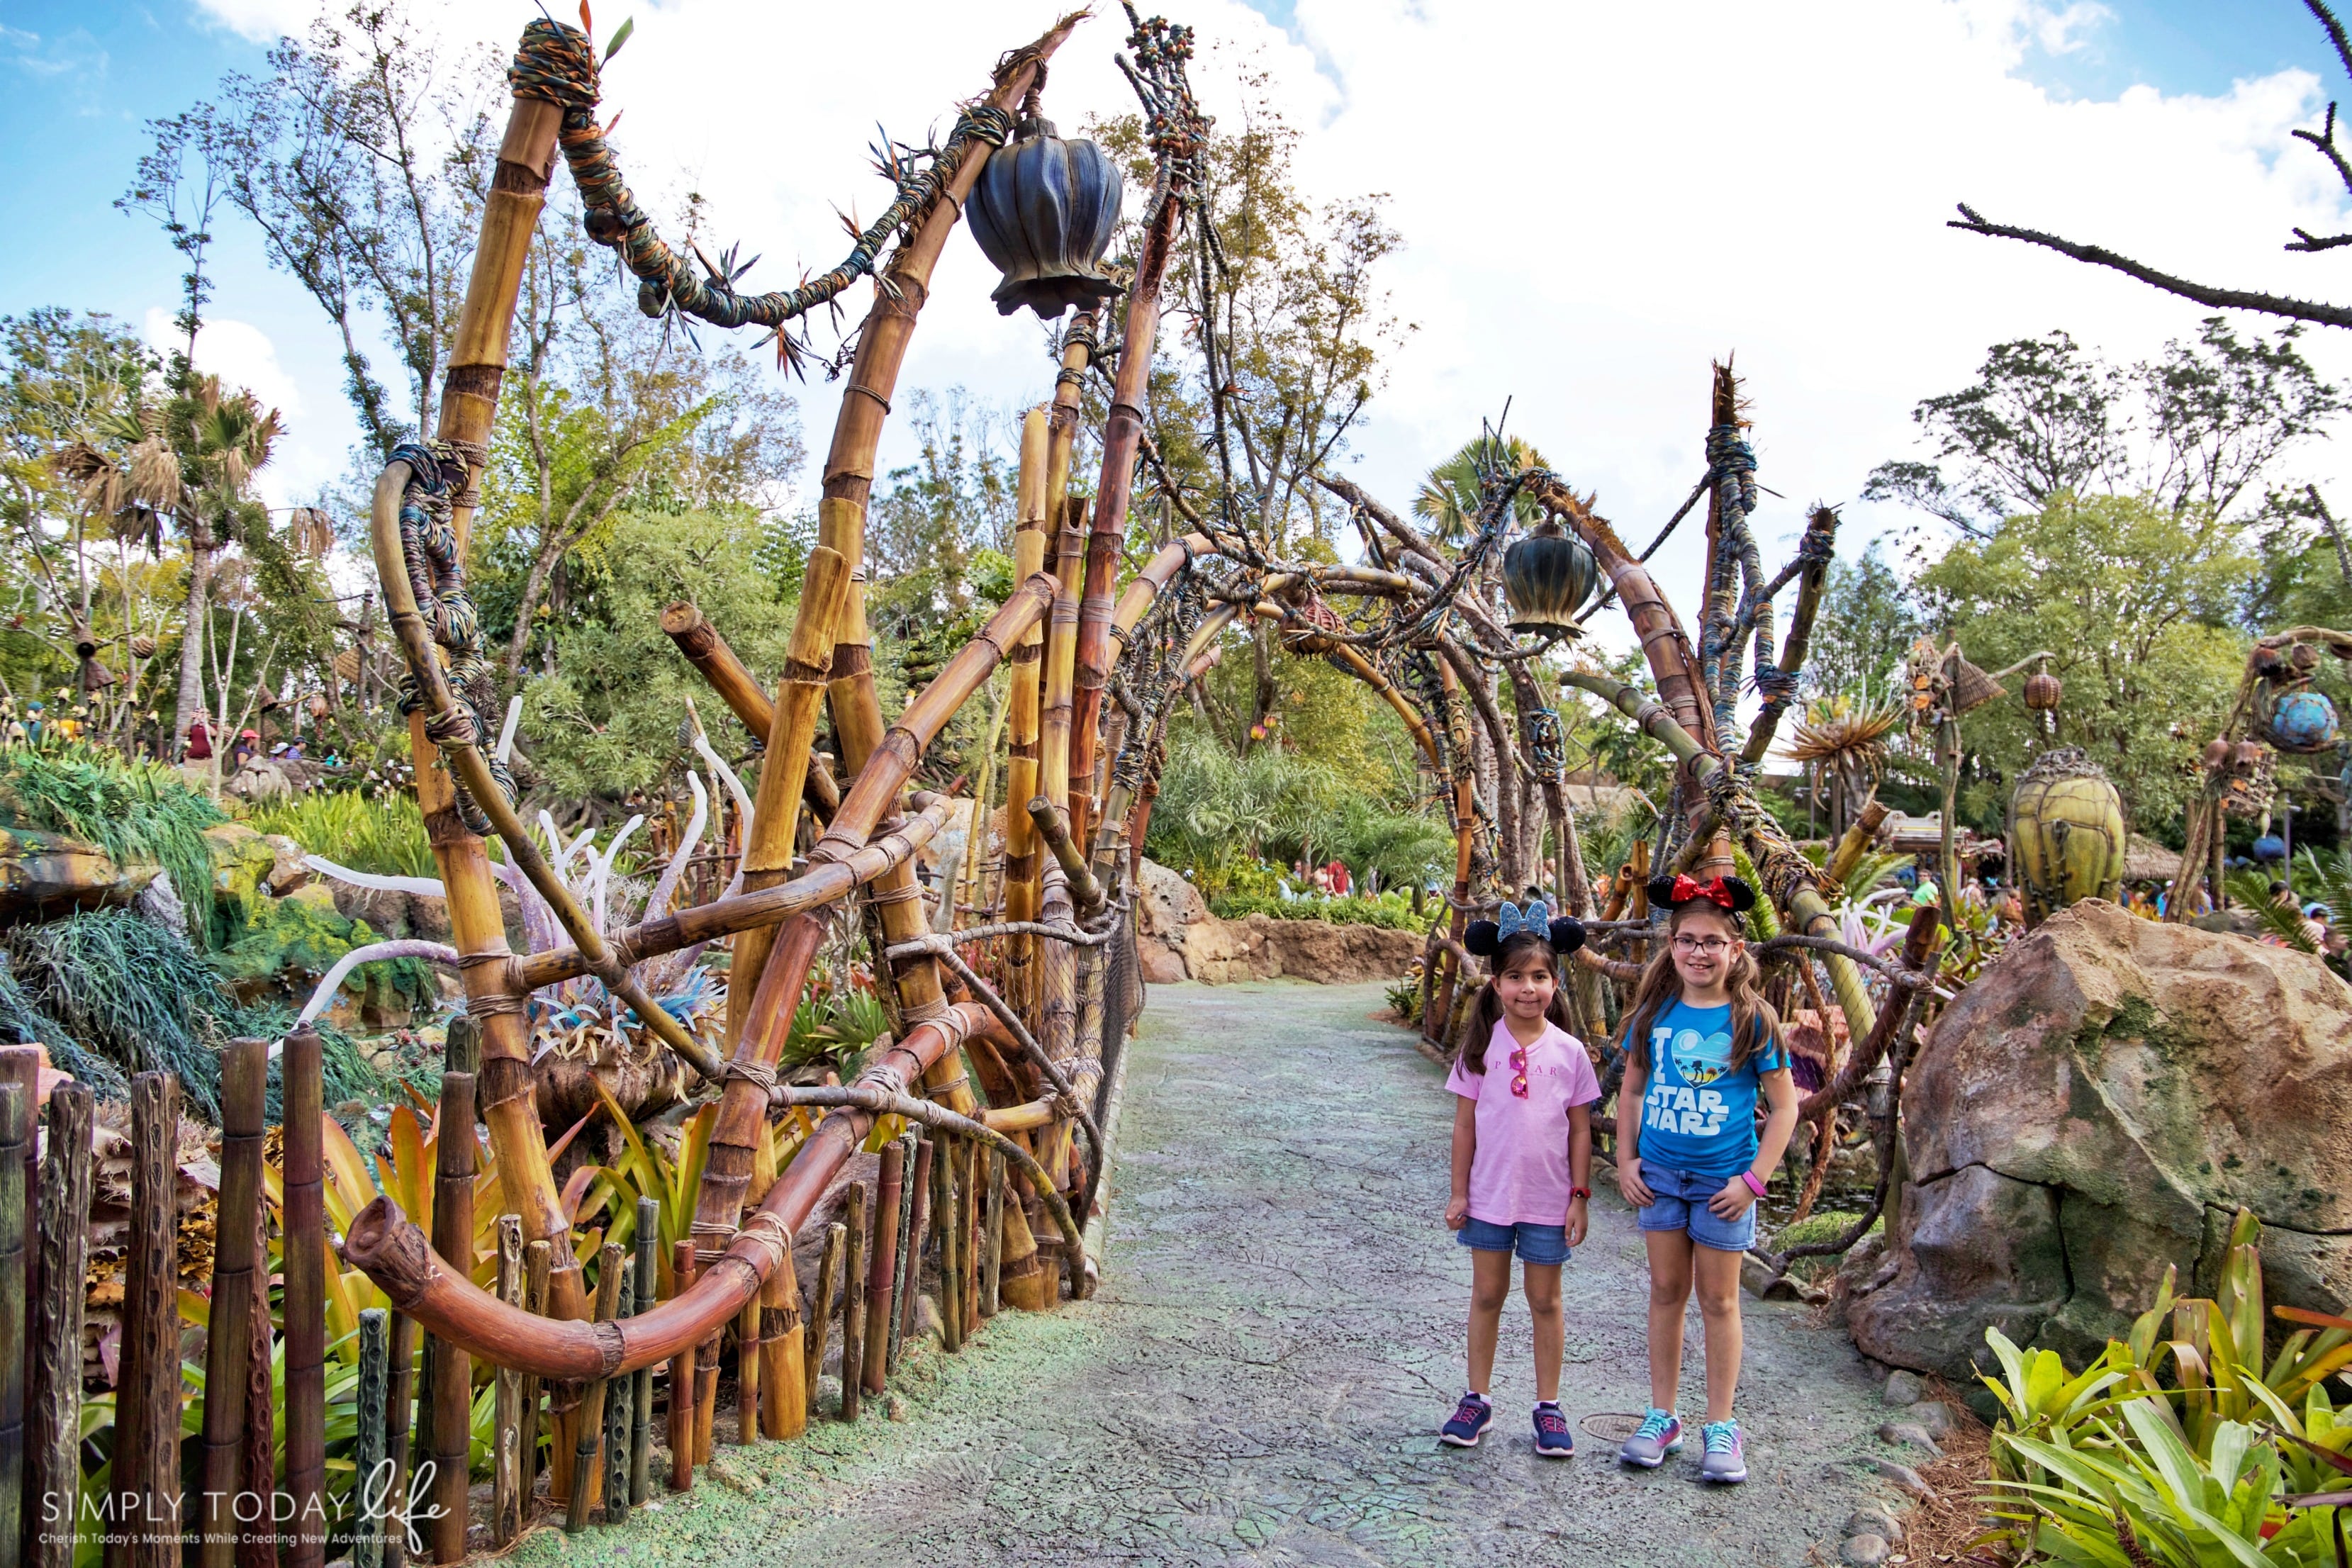 Best Disney Pandora Experiences For Kids | A Parents Guide To The World of Avatar - simplytodaylife.com